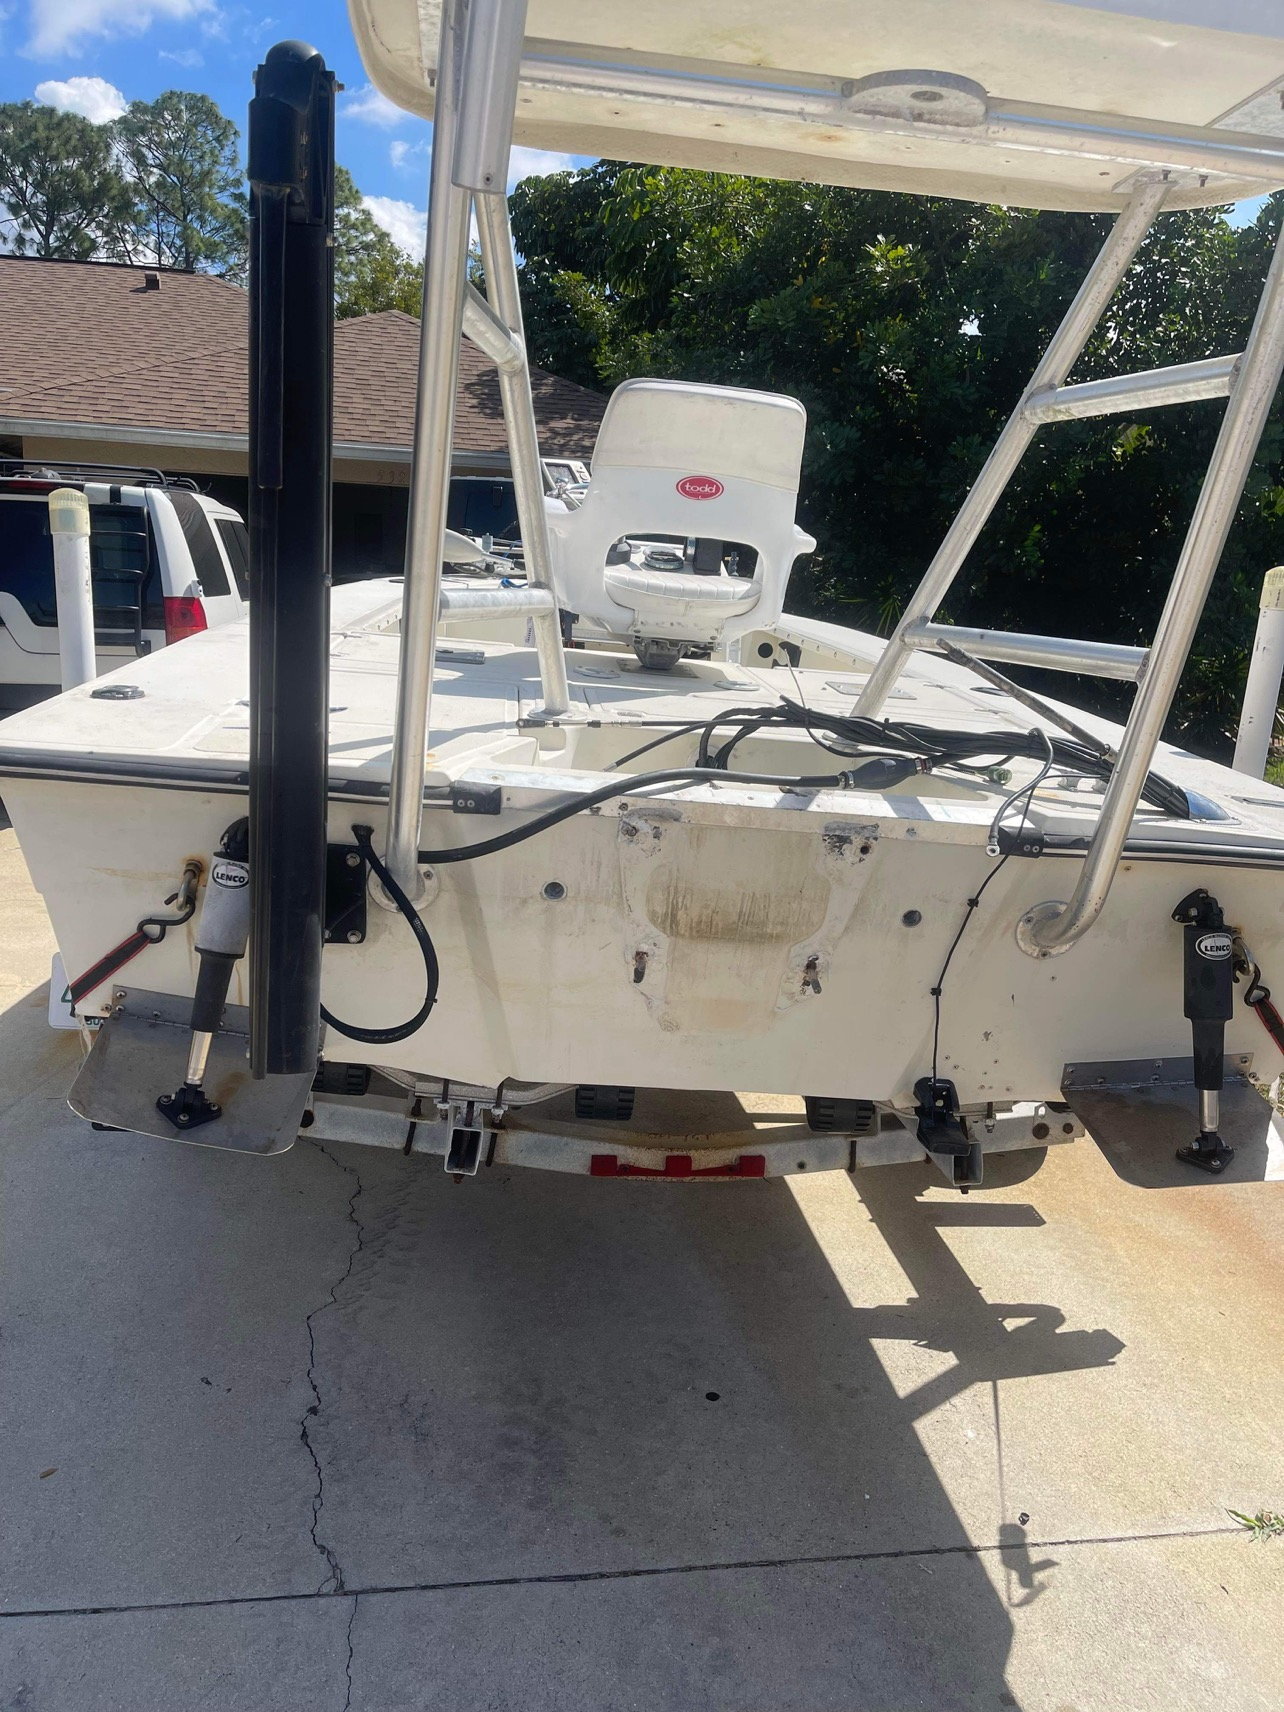 Pro and Cons Of Raising a Motor With Jack Plate - The Hull Truth - Boating  and Fishing Forum